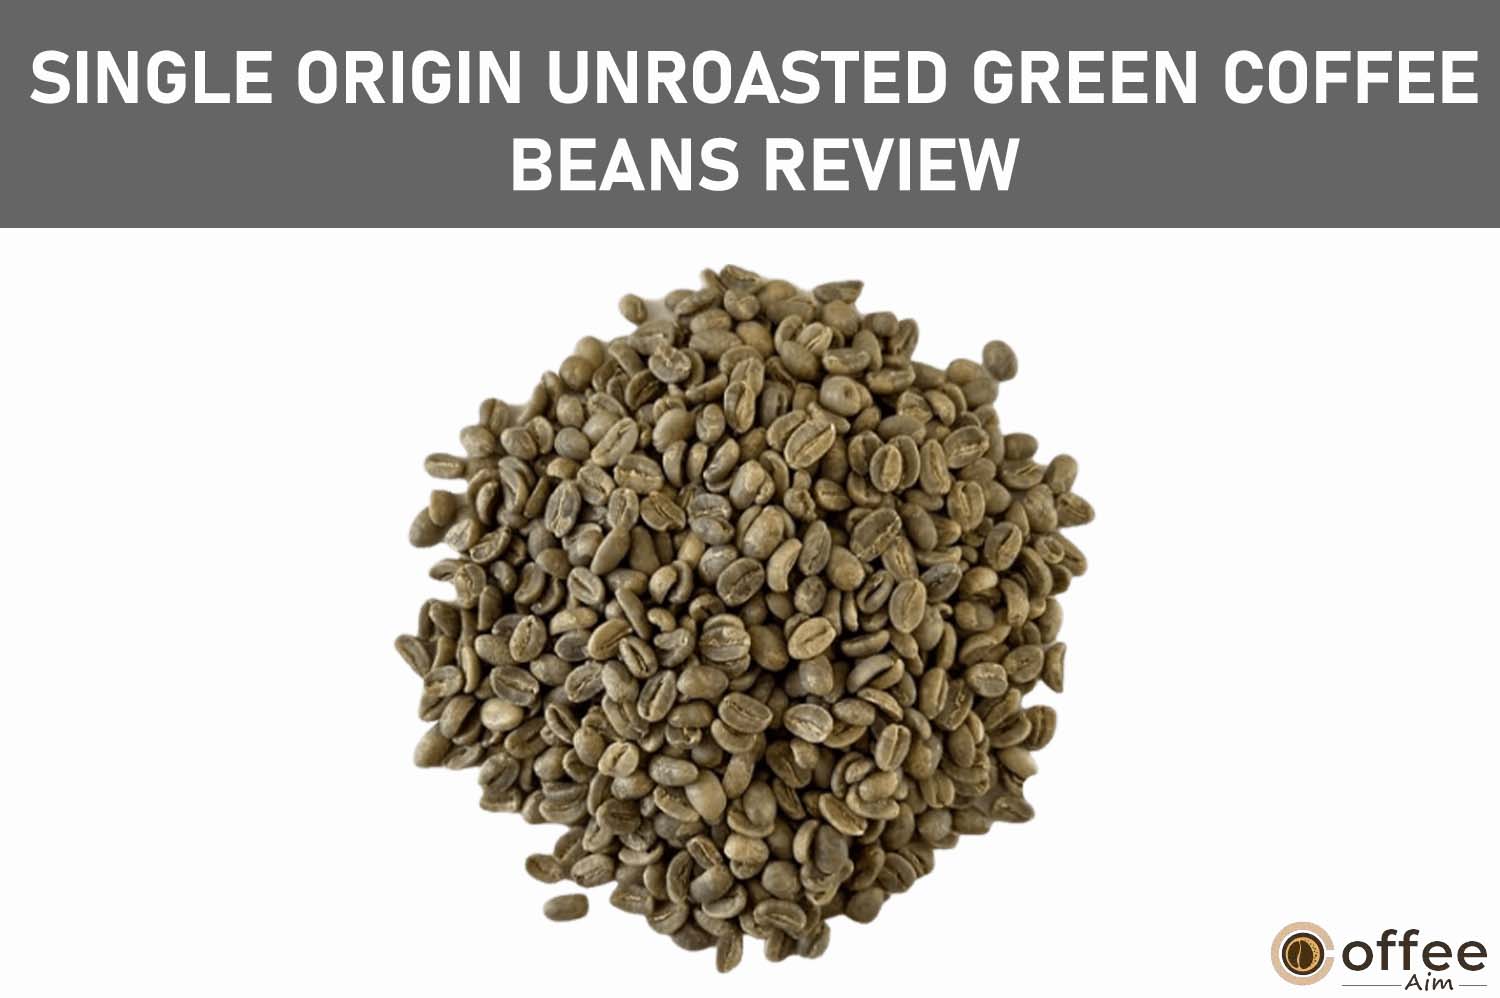 Featured image for the article "Single Origin Unroasted Green Coffee Beans Review"